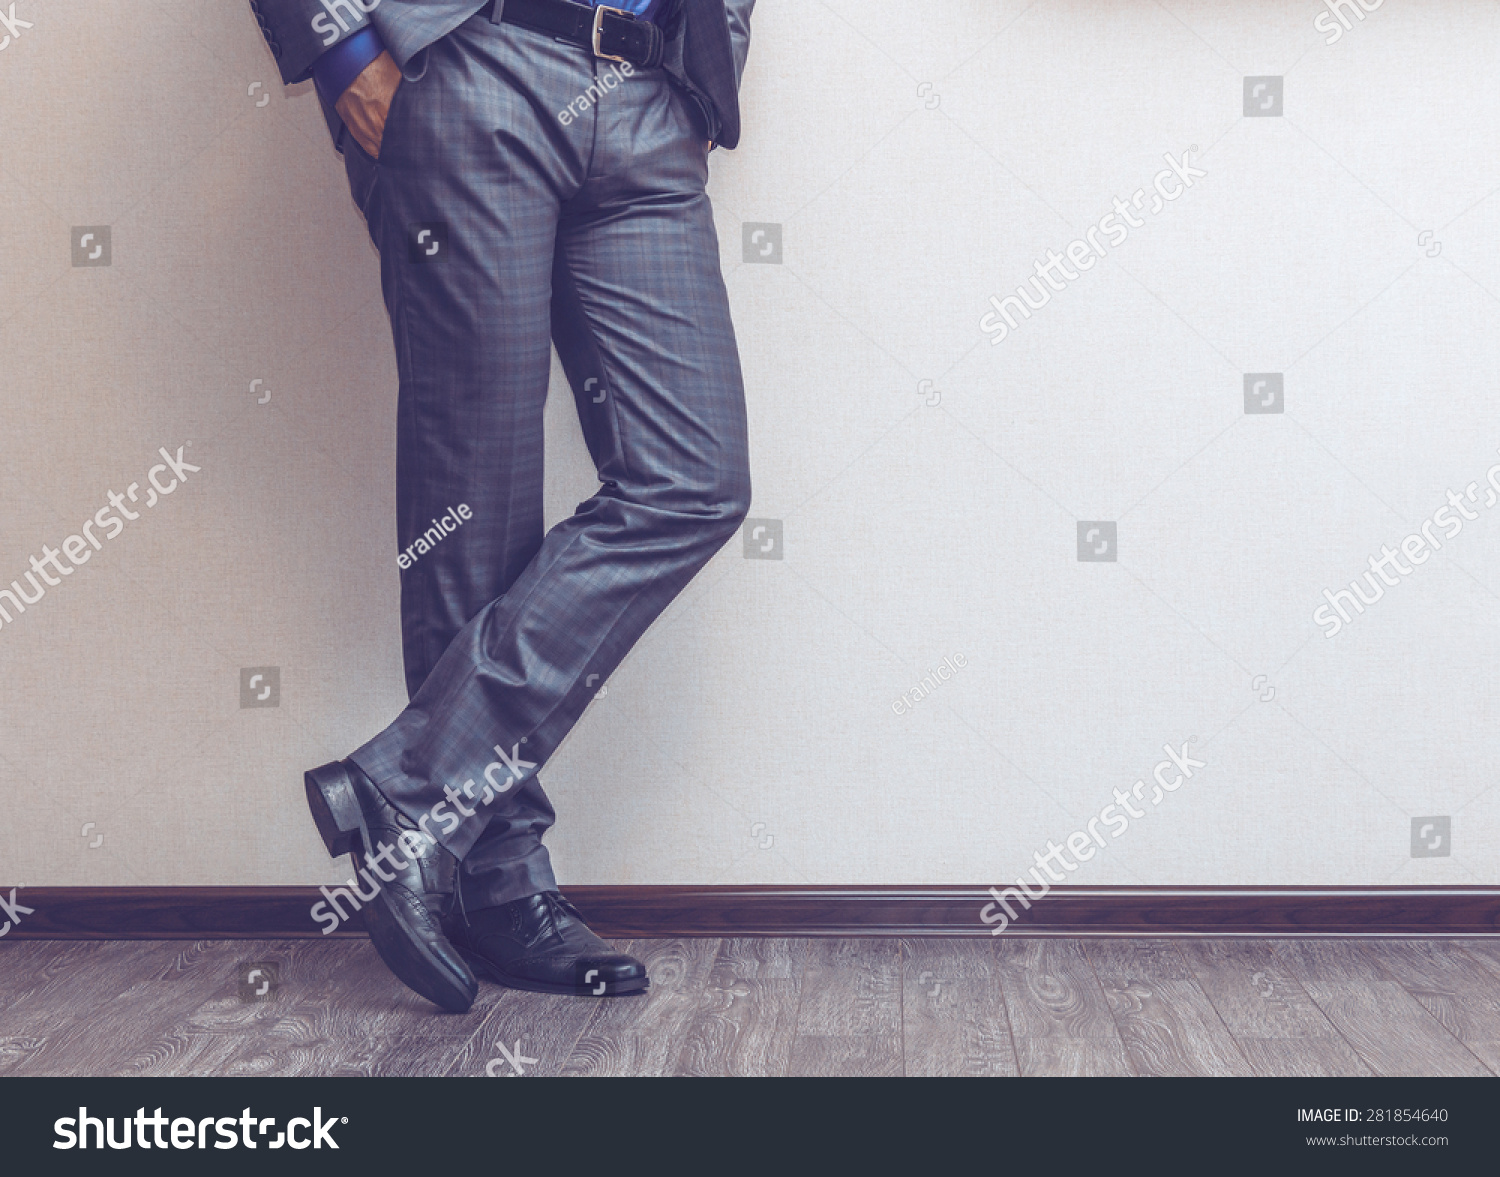 Young fashion businessman's legs in classic suit and shoes on wooden floor #281854640